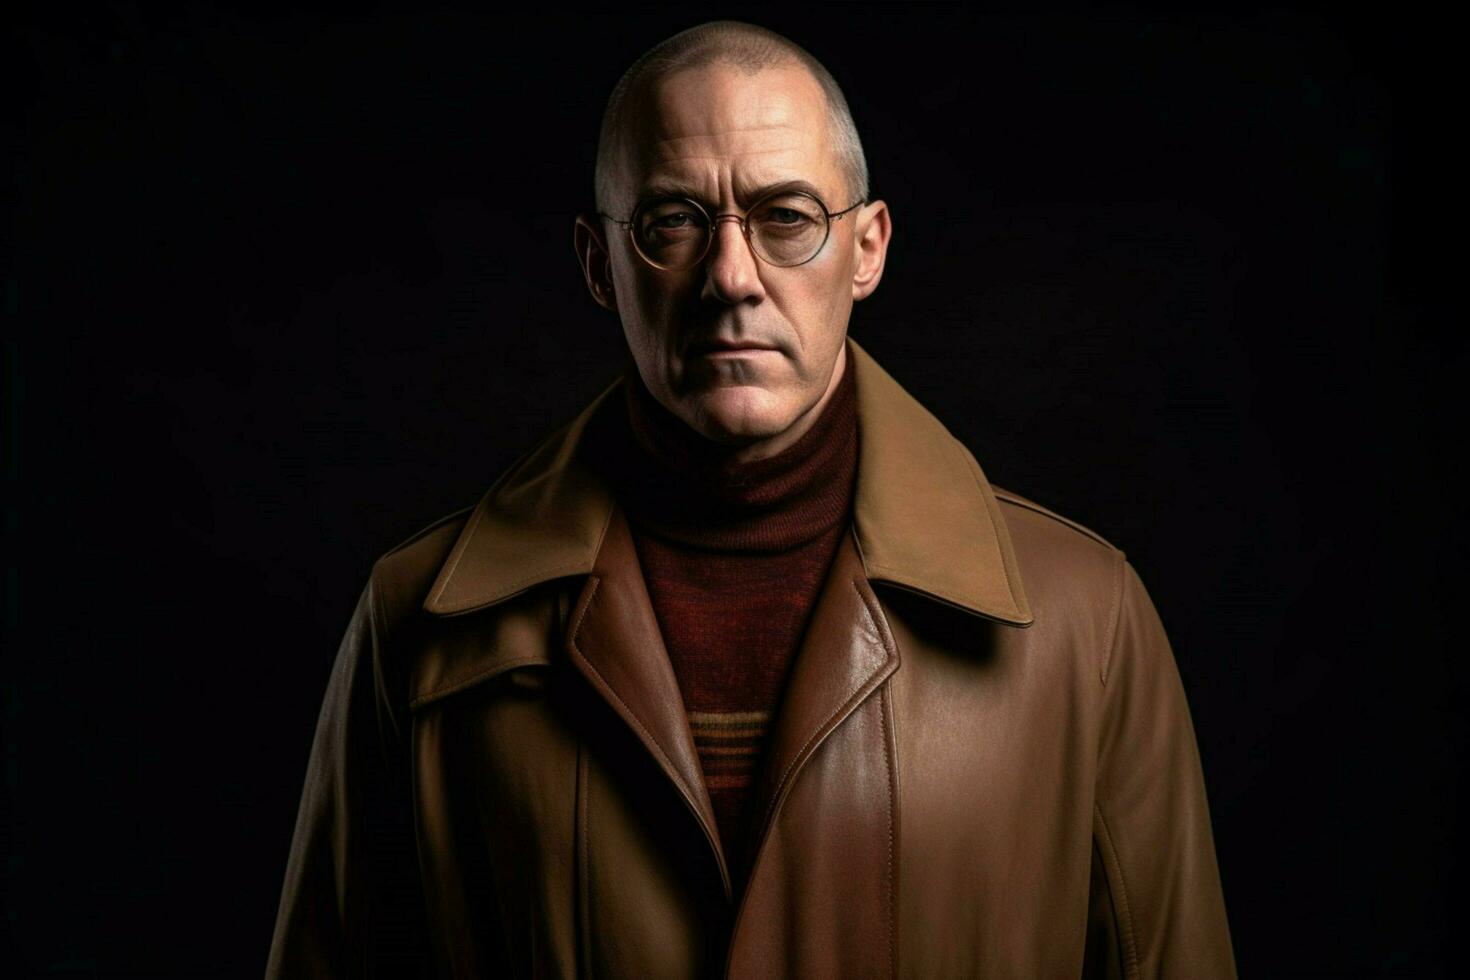 a man with glasses and a brown coat stands in fro photo